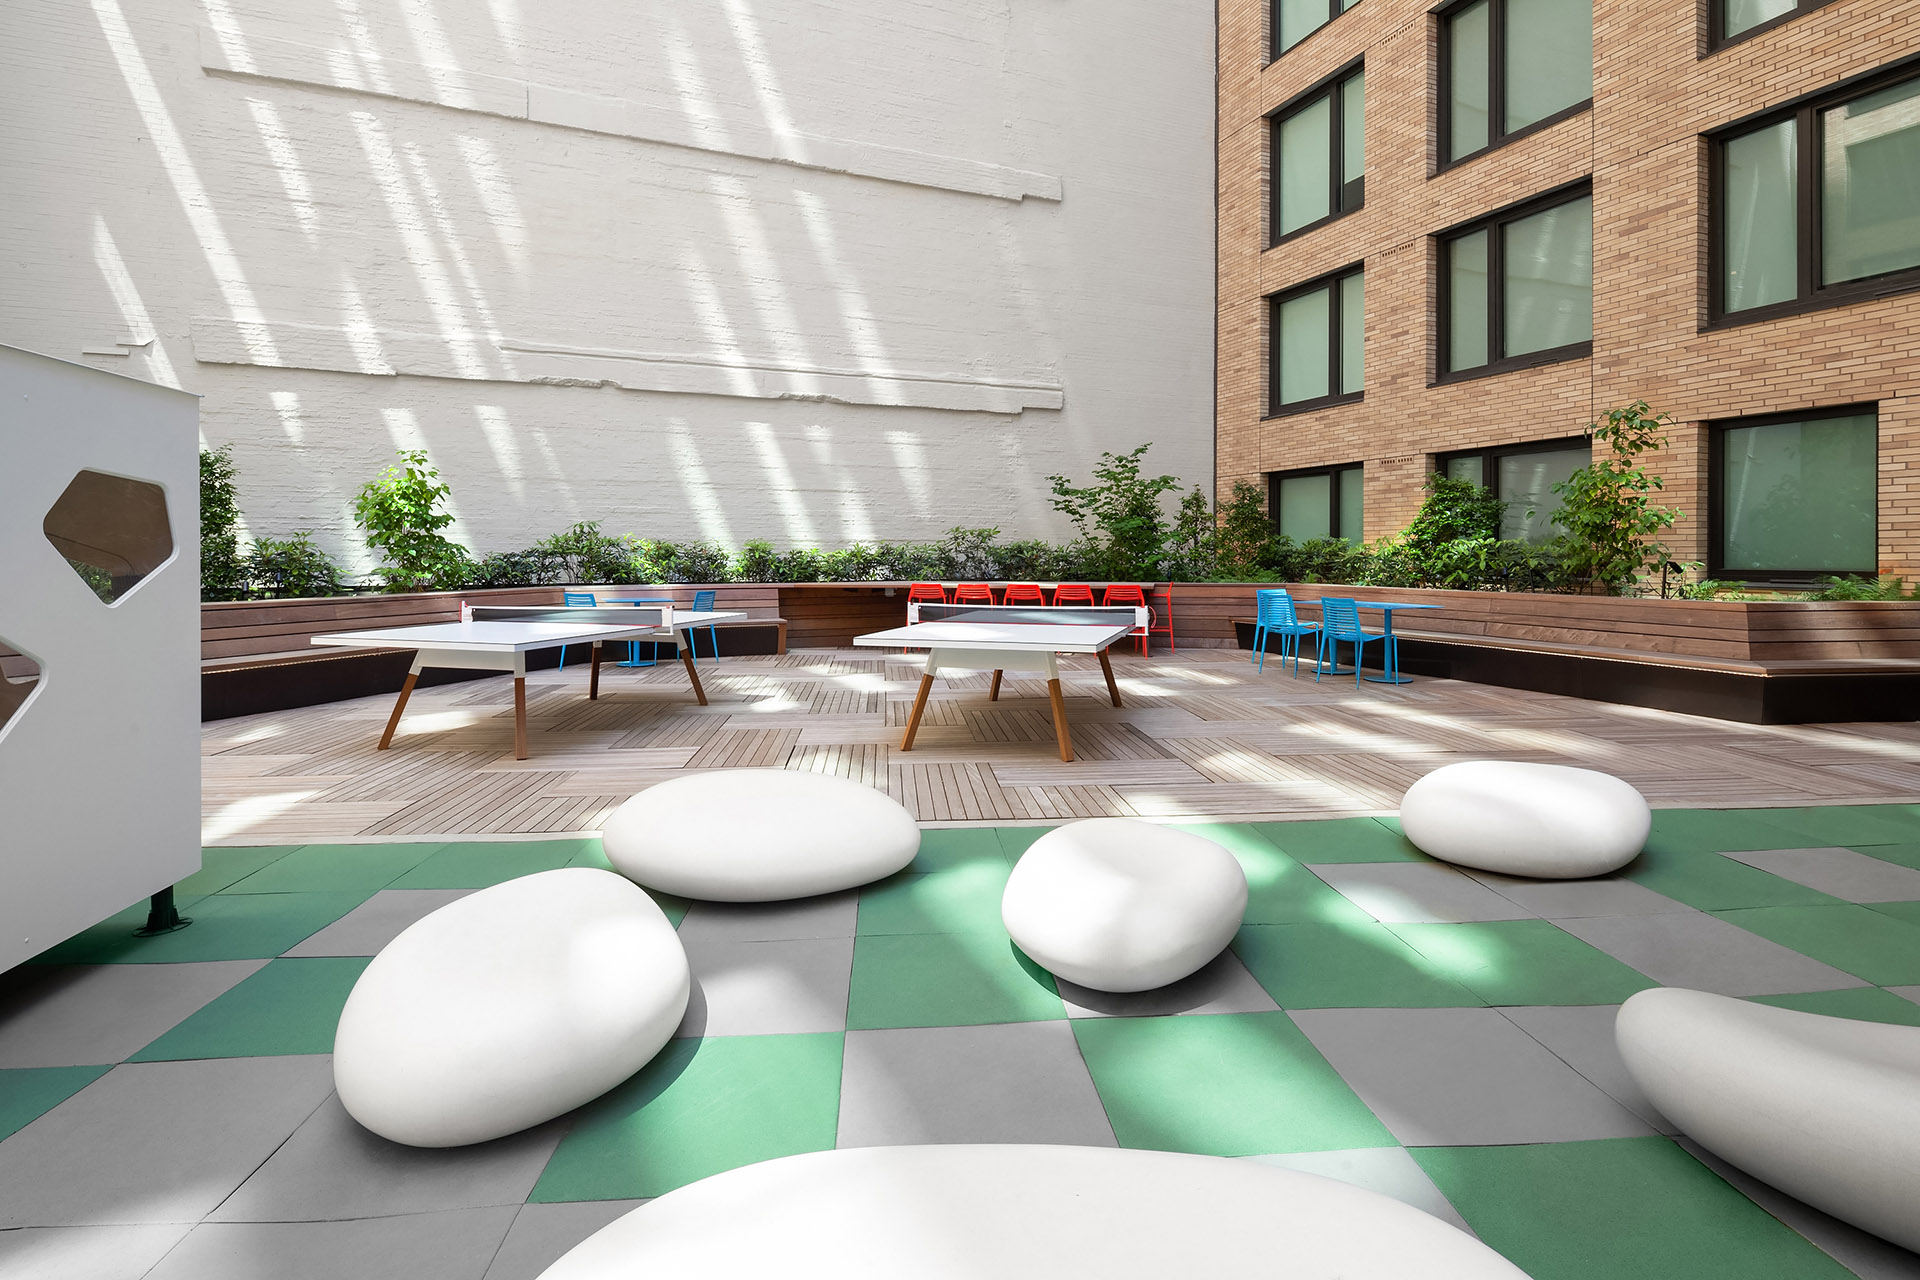 The Pierrepont Courtyard Featuring ample seating space, Ping Pong Tables and a play area for children